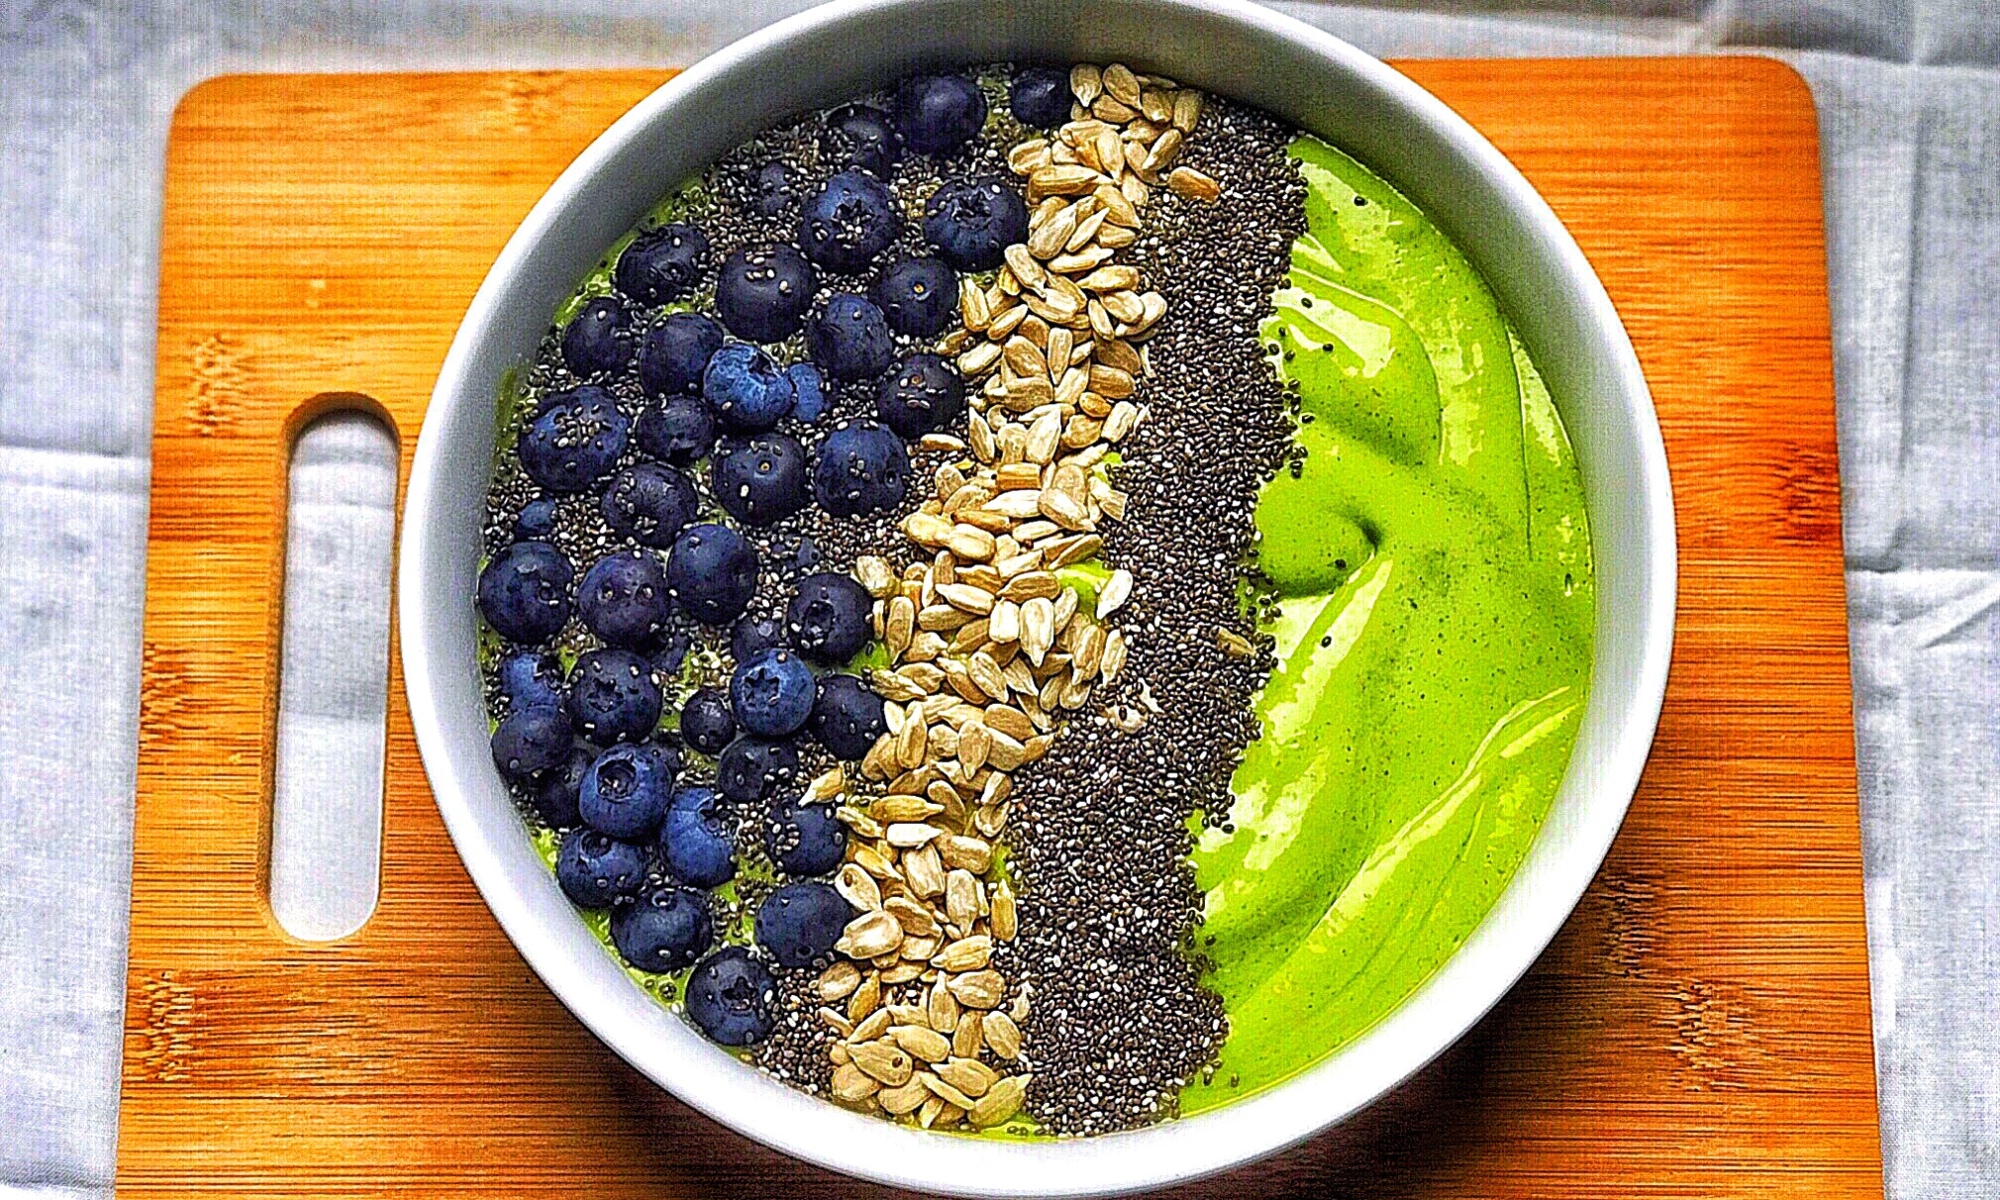 smoothie, smoothie bowl, green smoothie, green smoothie bowl, greens, spinach, avocado, blueberries, banana, chia seeds, sunflower seeds, flax seeds, dates, almond milk, coconut milk, nutribullet, food, health, healthy foods, weight loss, drink